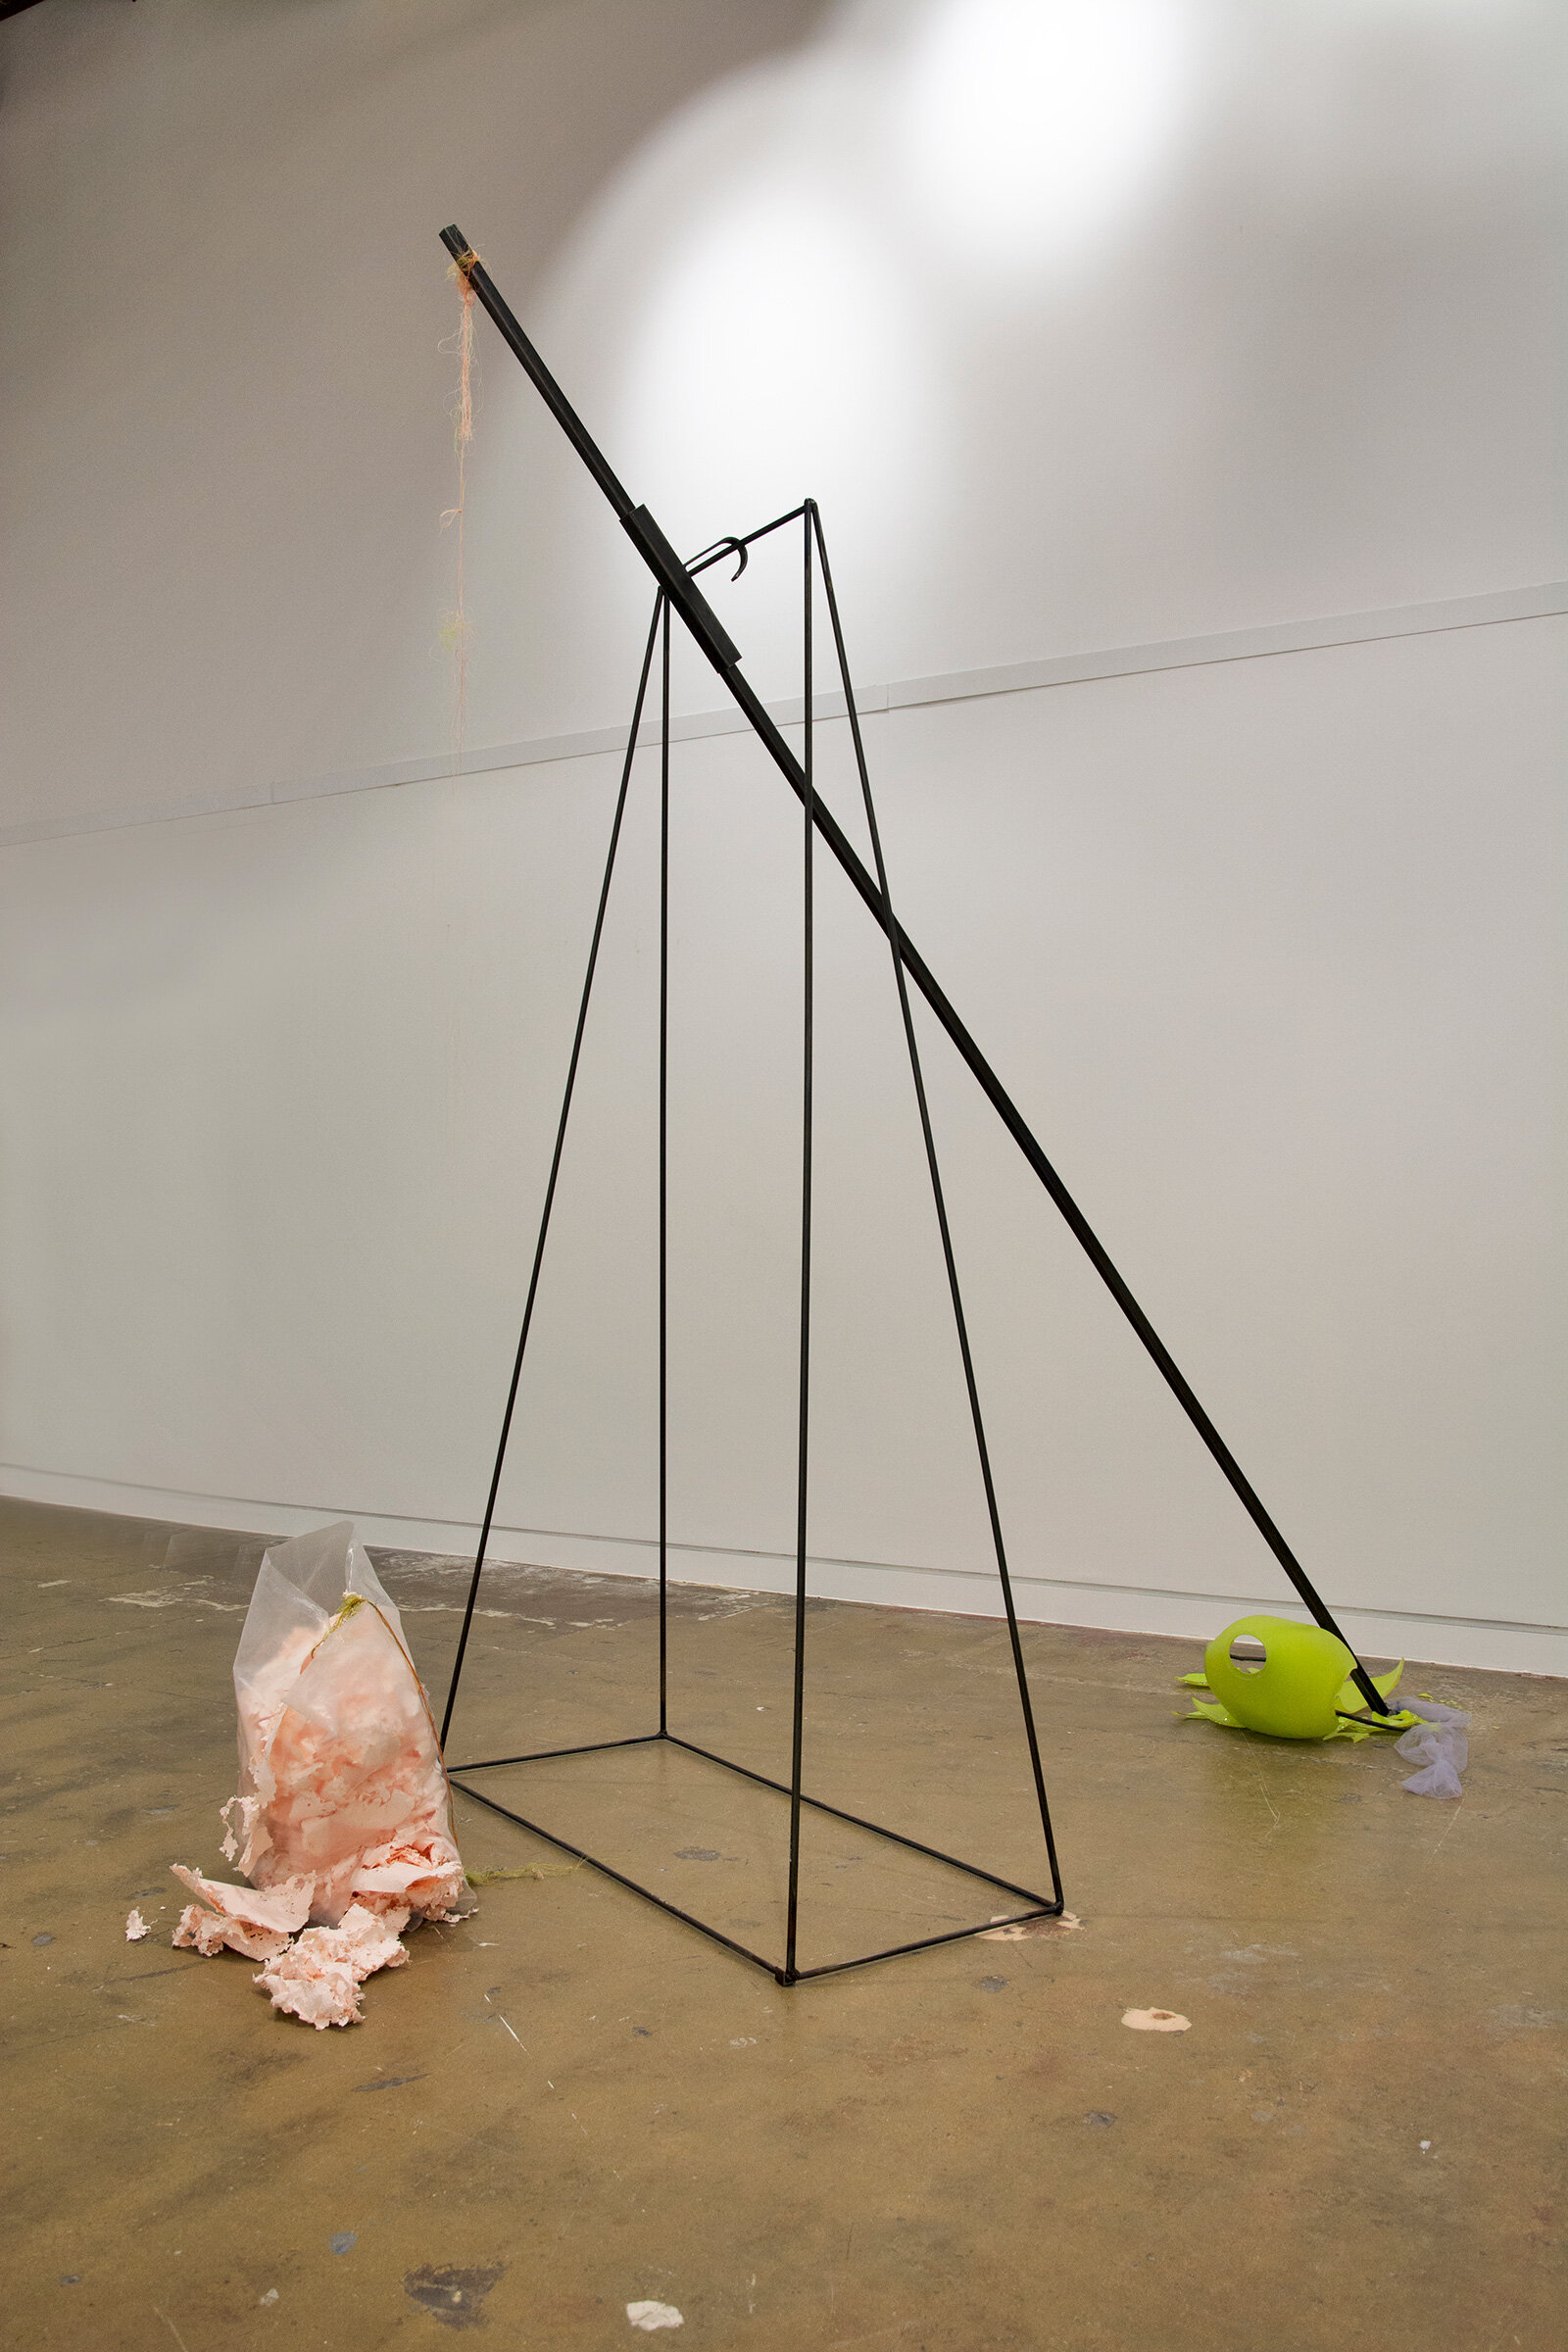  Kelly M O’Brien,  This May Be Under the Stated Weight (Aftermath) , installation view. Steel, glass, paper, thread, tulle, plastic. 230 x 350 x 122 cm ©2019 